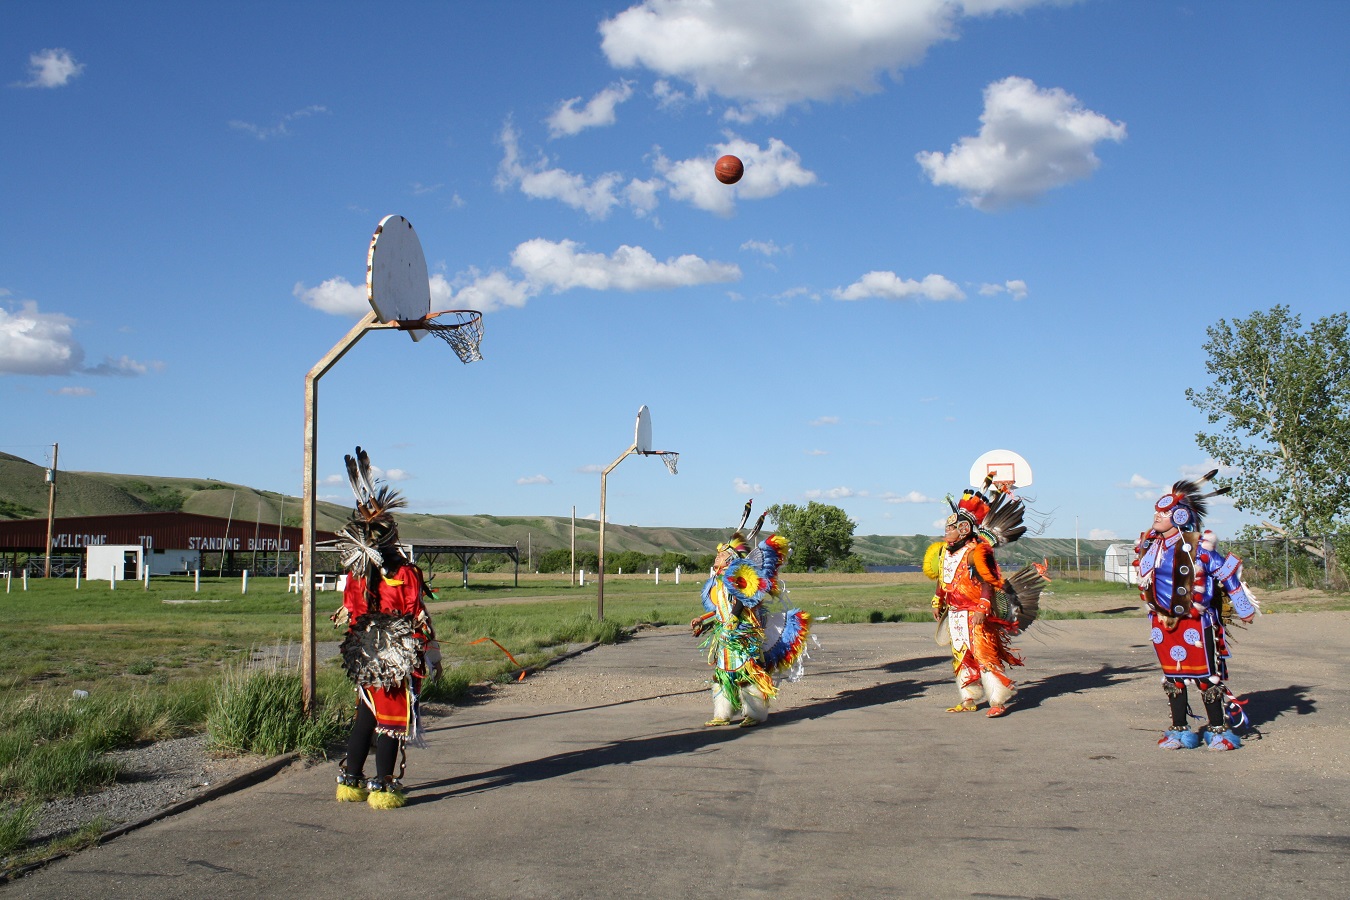 Four Indigenous men dressed in traditional regalia play basketball outside.